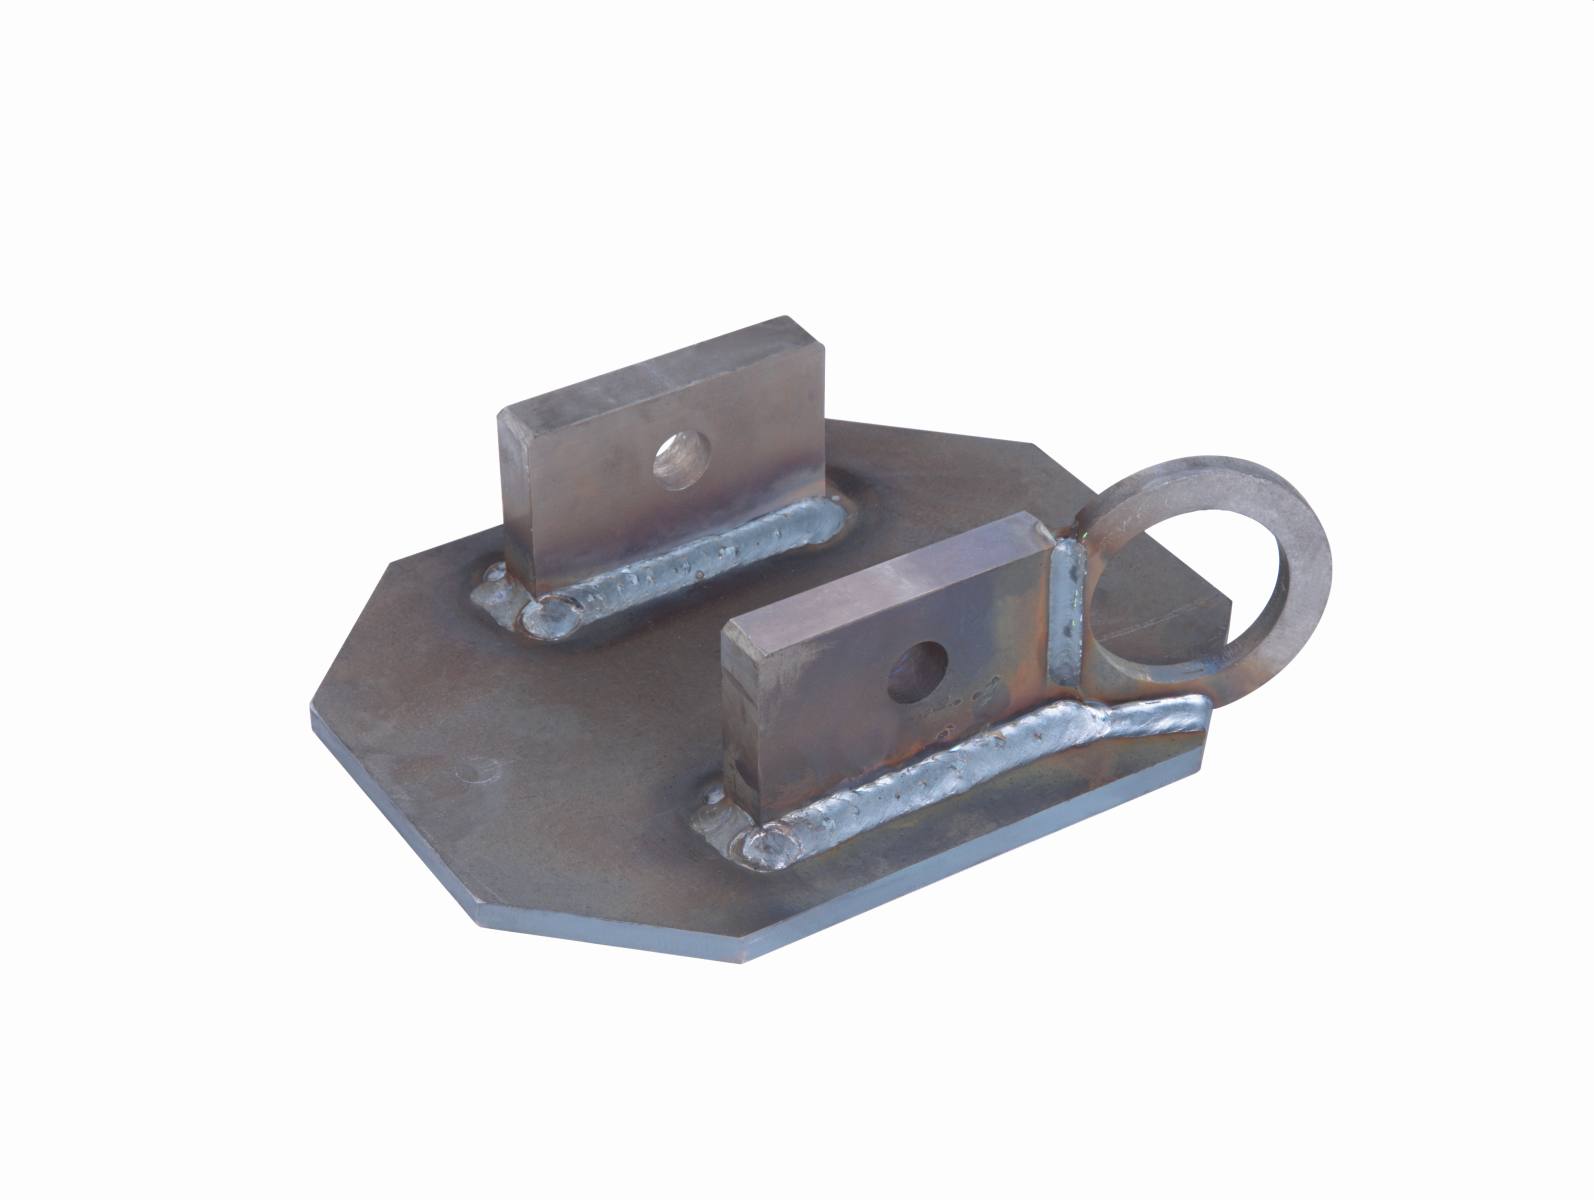 3M DBI-SALA adapter plate for PFAS pole for welding, galvanised steel, sandblasted, incl. single anchor point